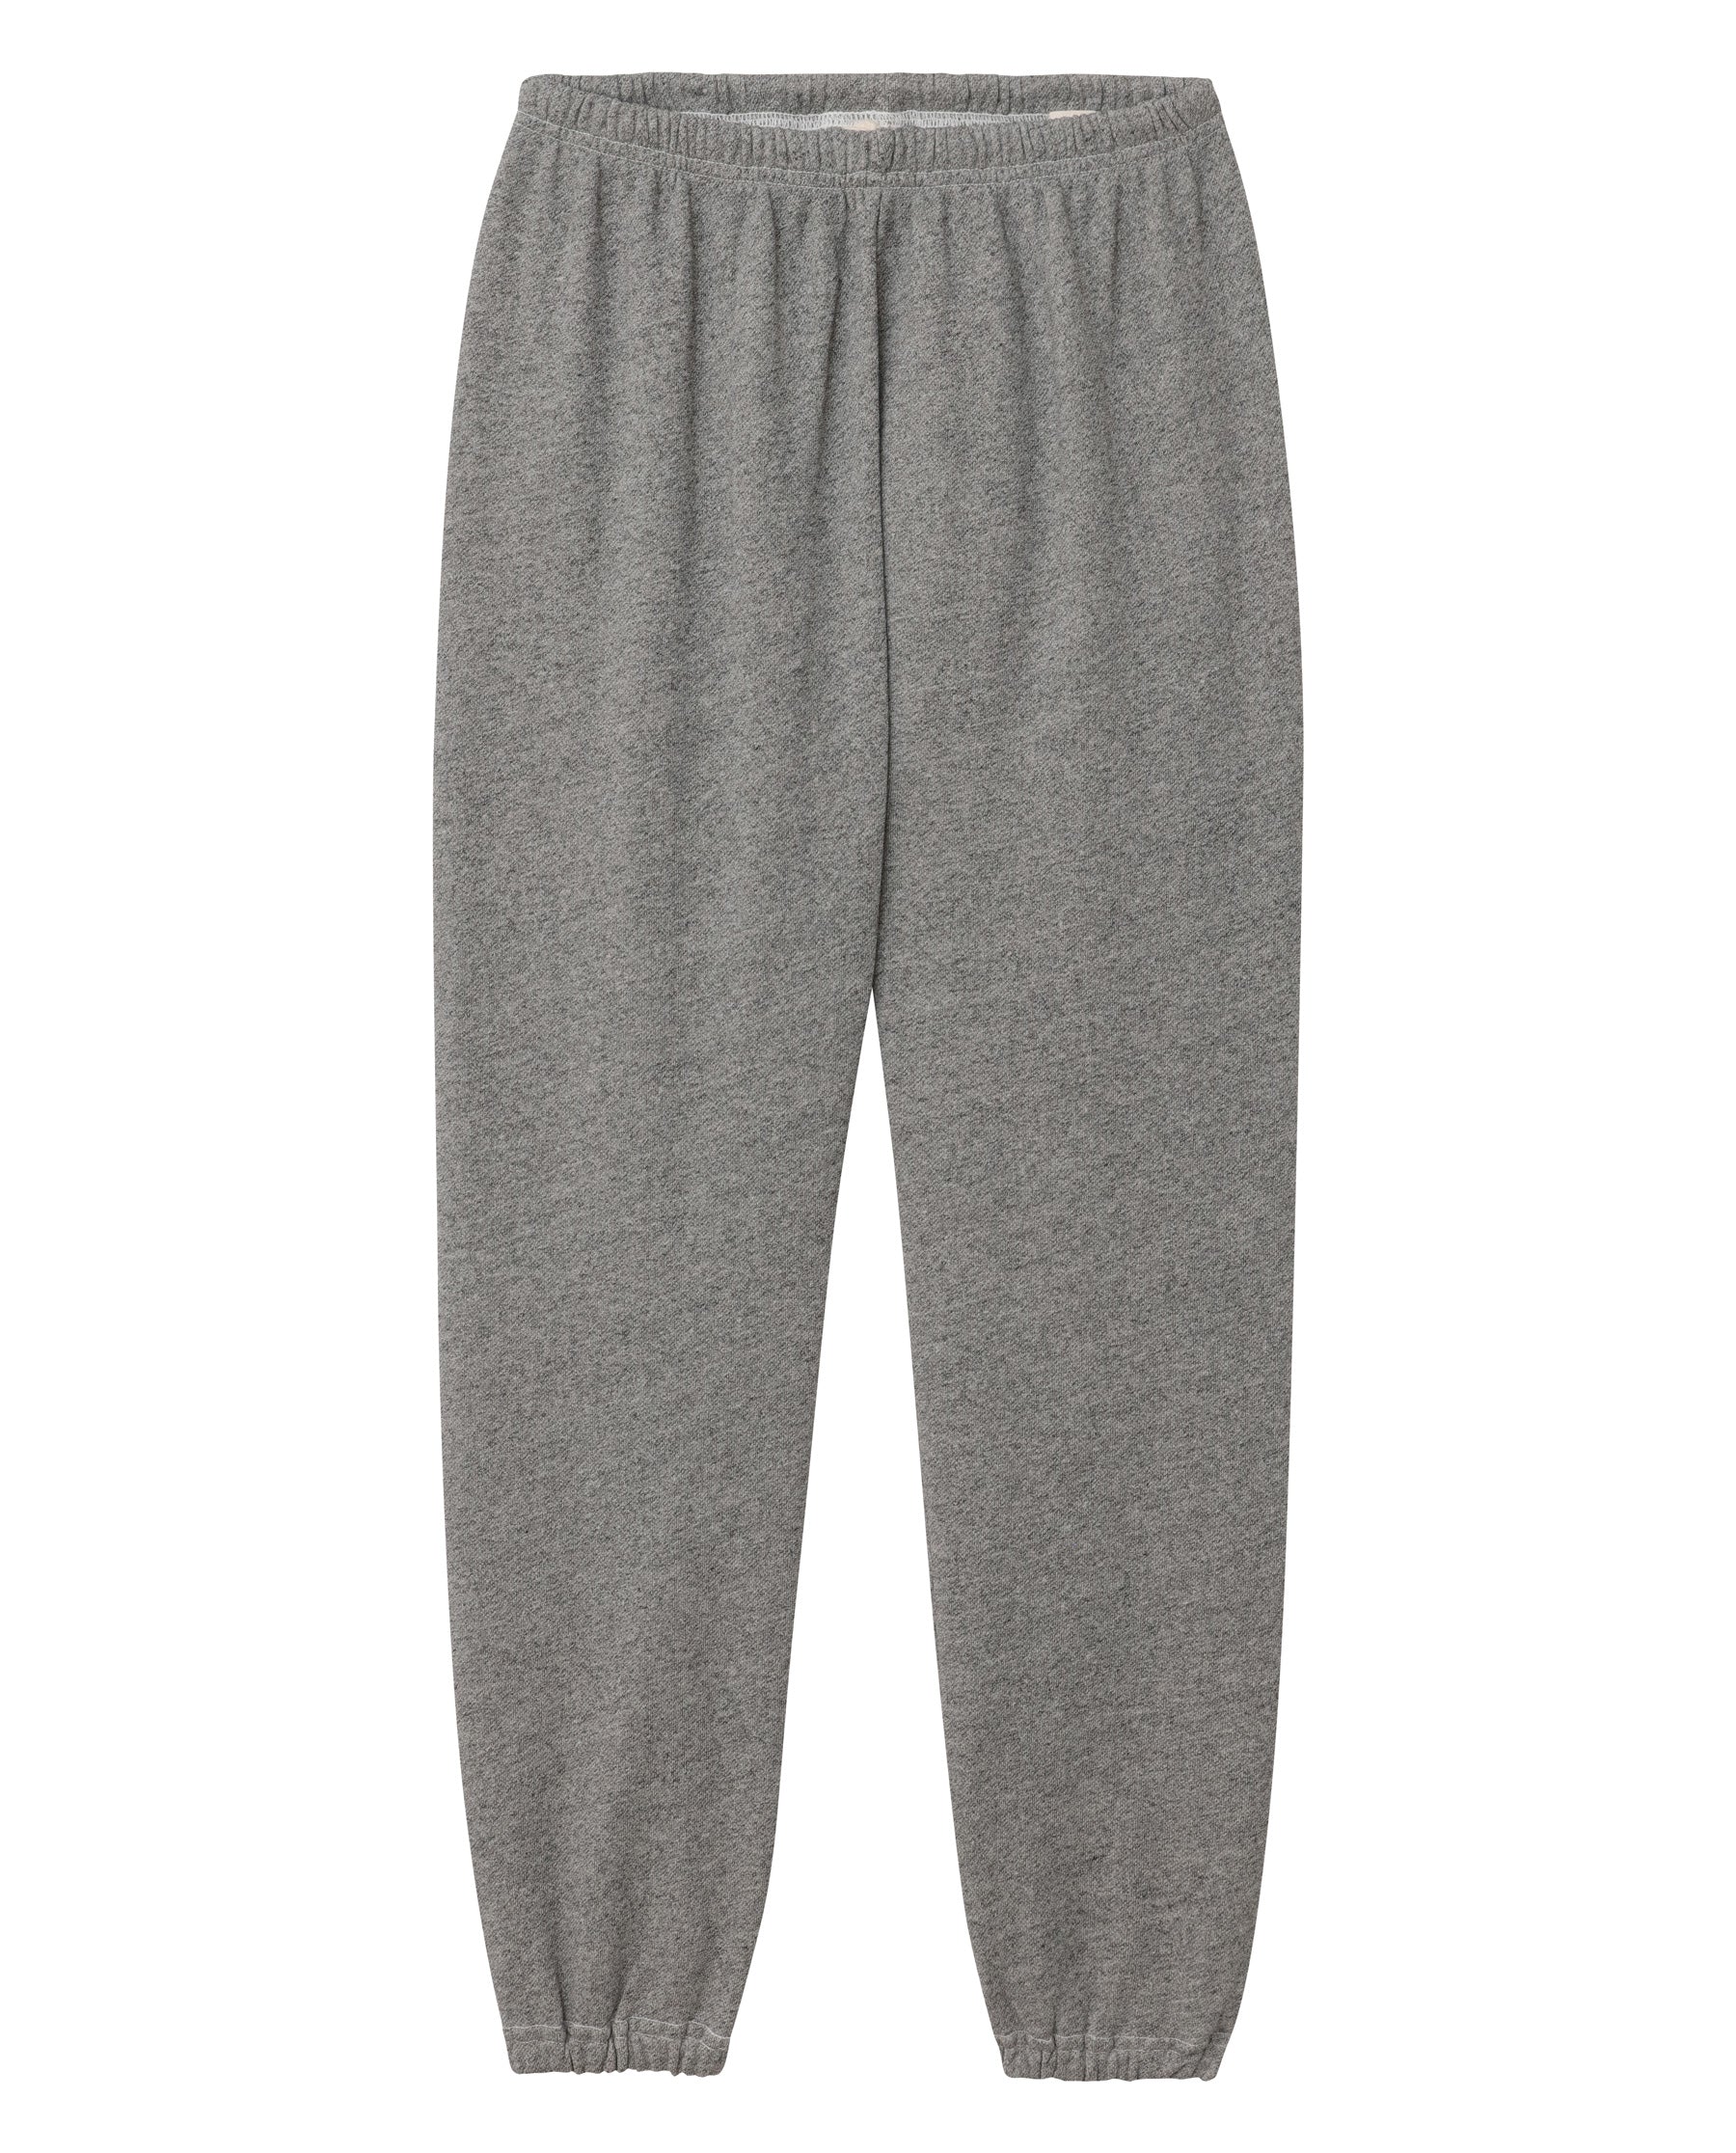 The Stadium Sweatpant. Solid -- Varsity Grey SWEATPANTS THE GREAT. CORE KNITS